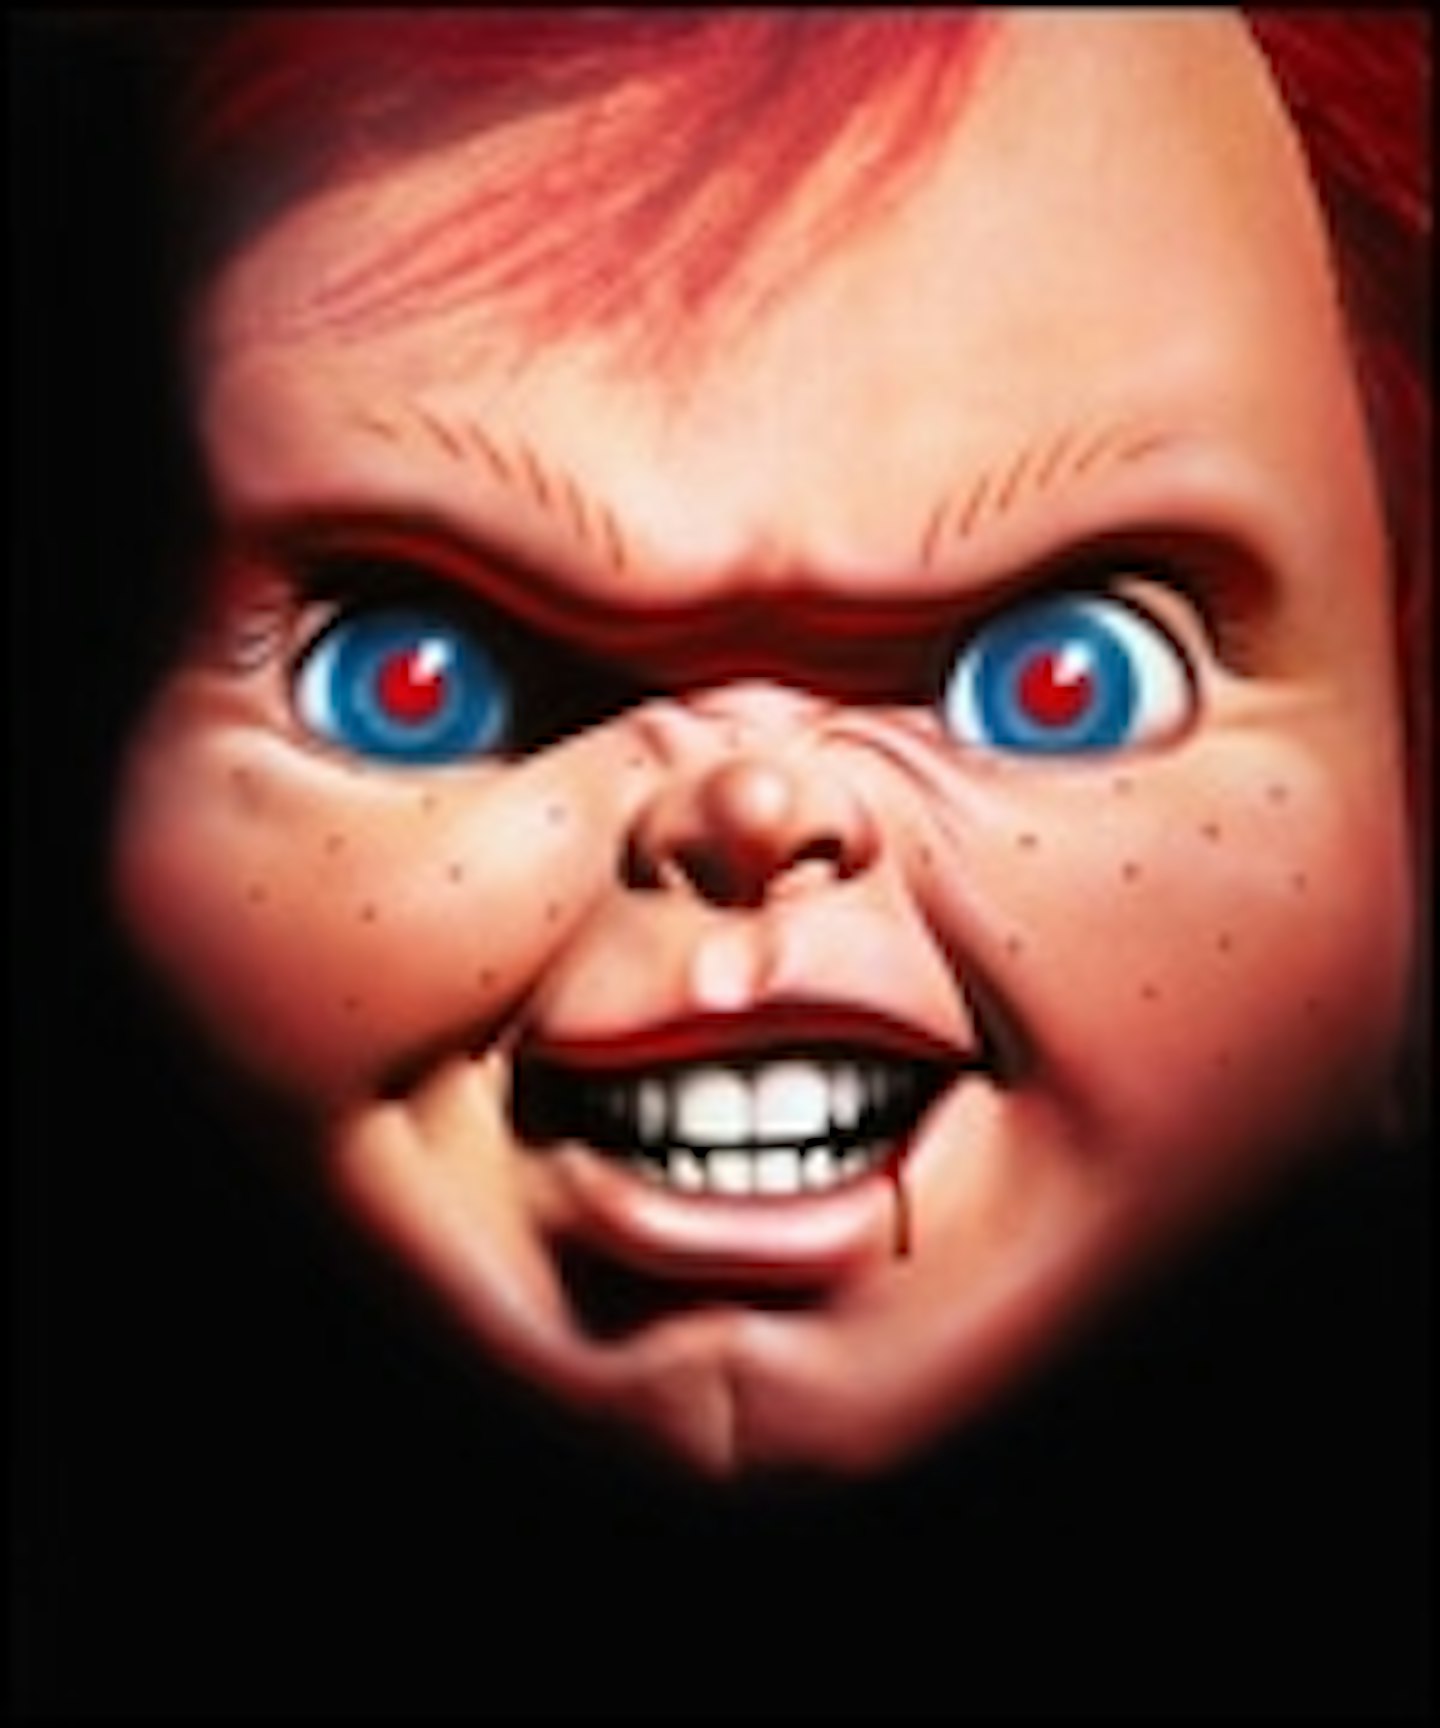 Are You Ready For Revenge Of Chucky?